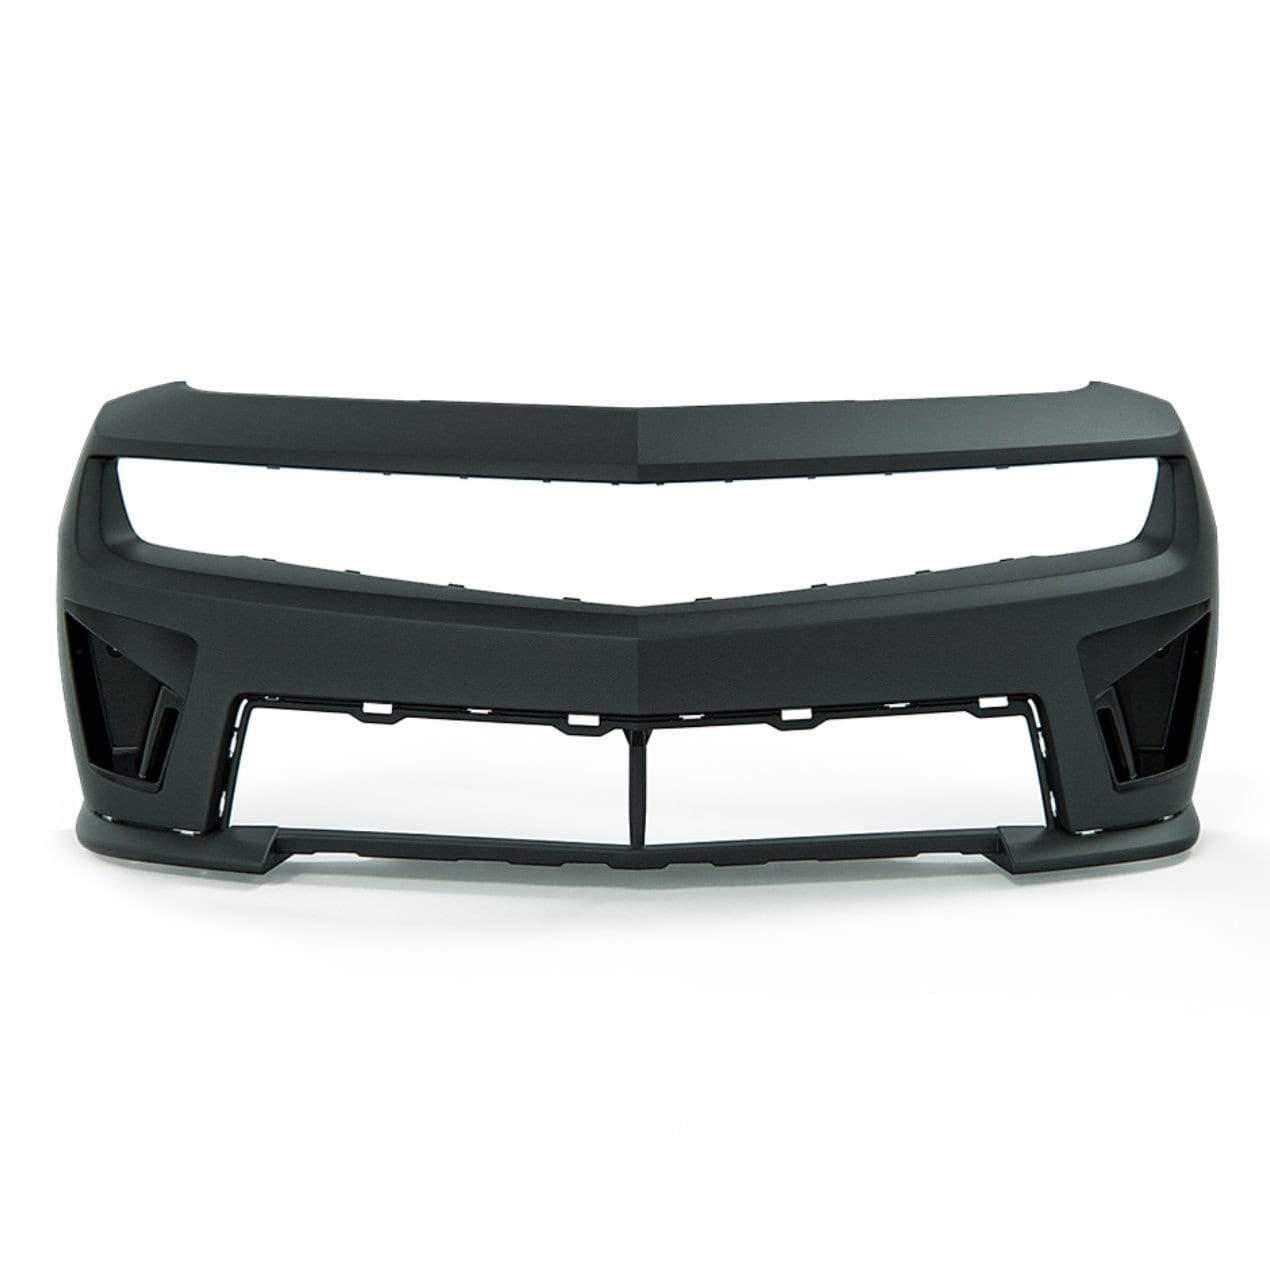 ACS Composite T1 Bumper Assembly [33-4-130]PRM for Camaro ZL1 with aggressive cooling ports and customization options.